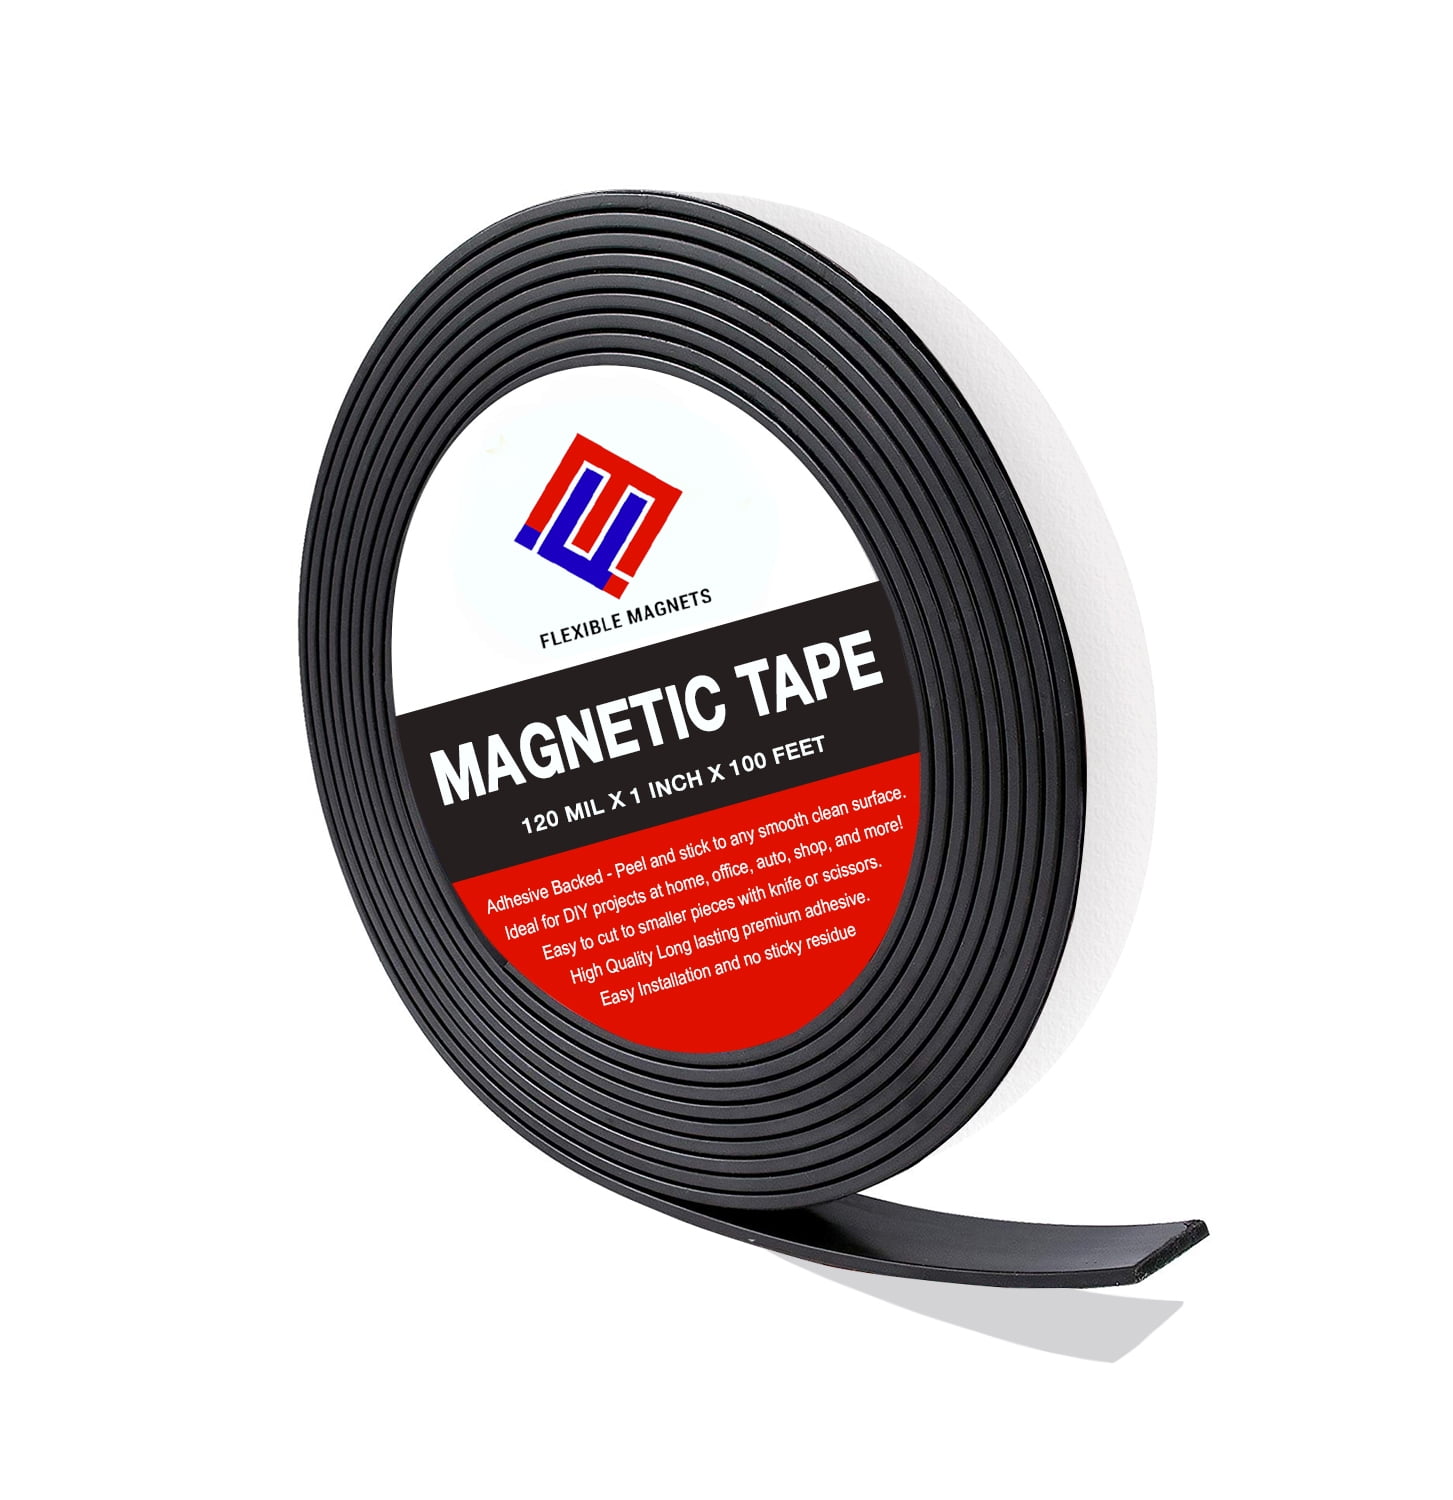 Magnetic Tape Roll with Adhesive Backing - Strip of Peel and Stick Magnets  - Super Strong & Sticky by Flexible Magnets (120 mil x 0.5 inch x 25 feet)  